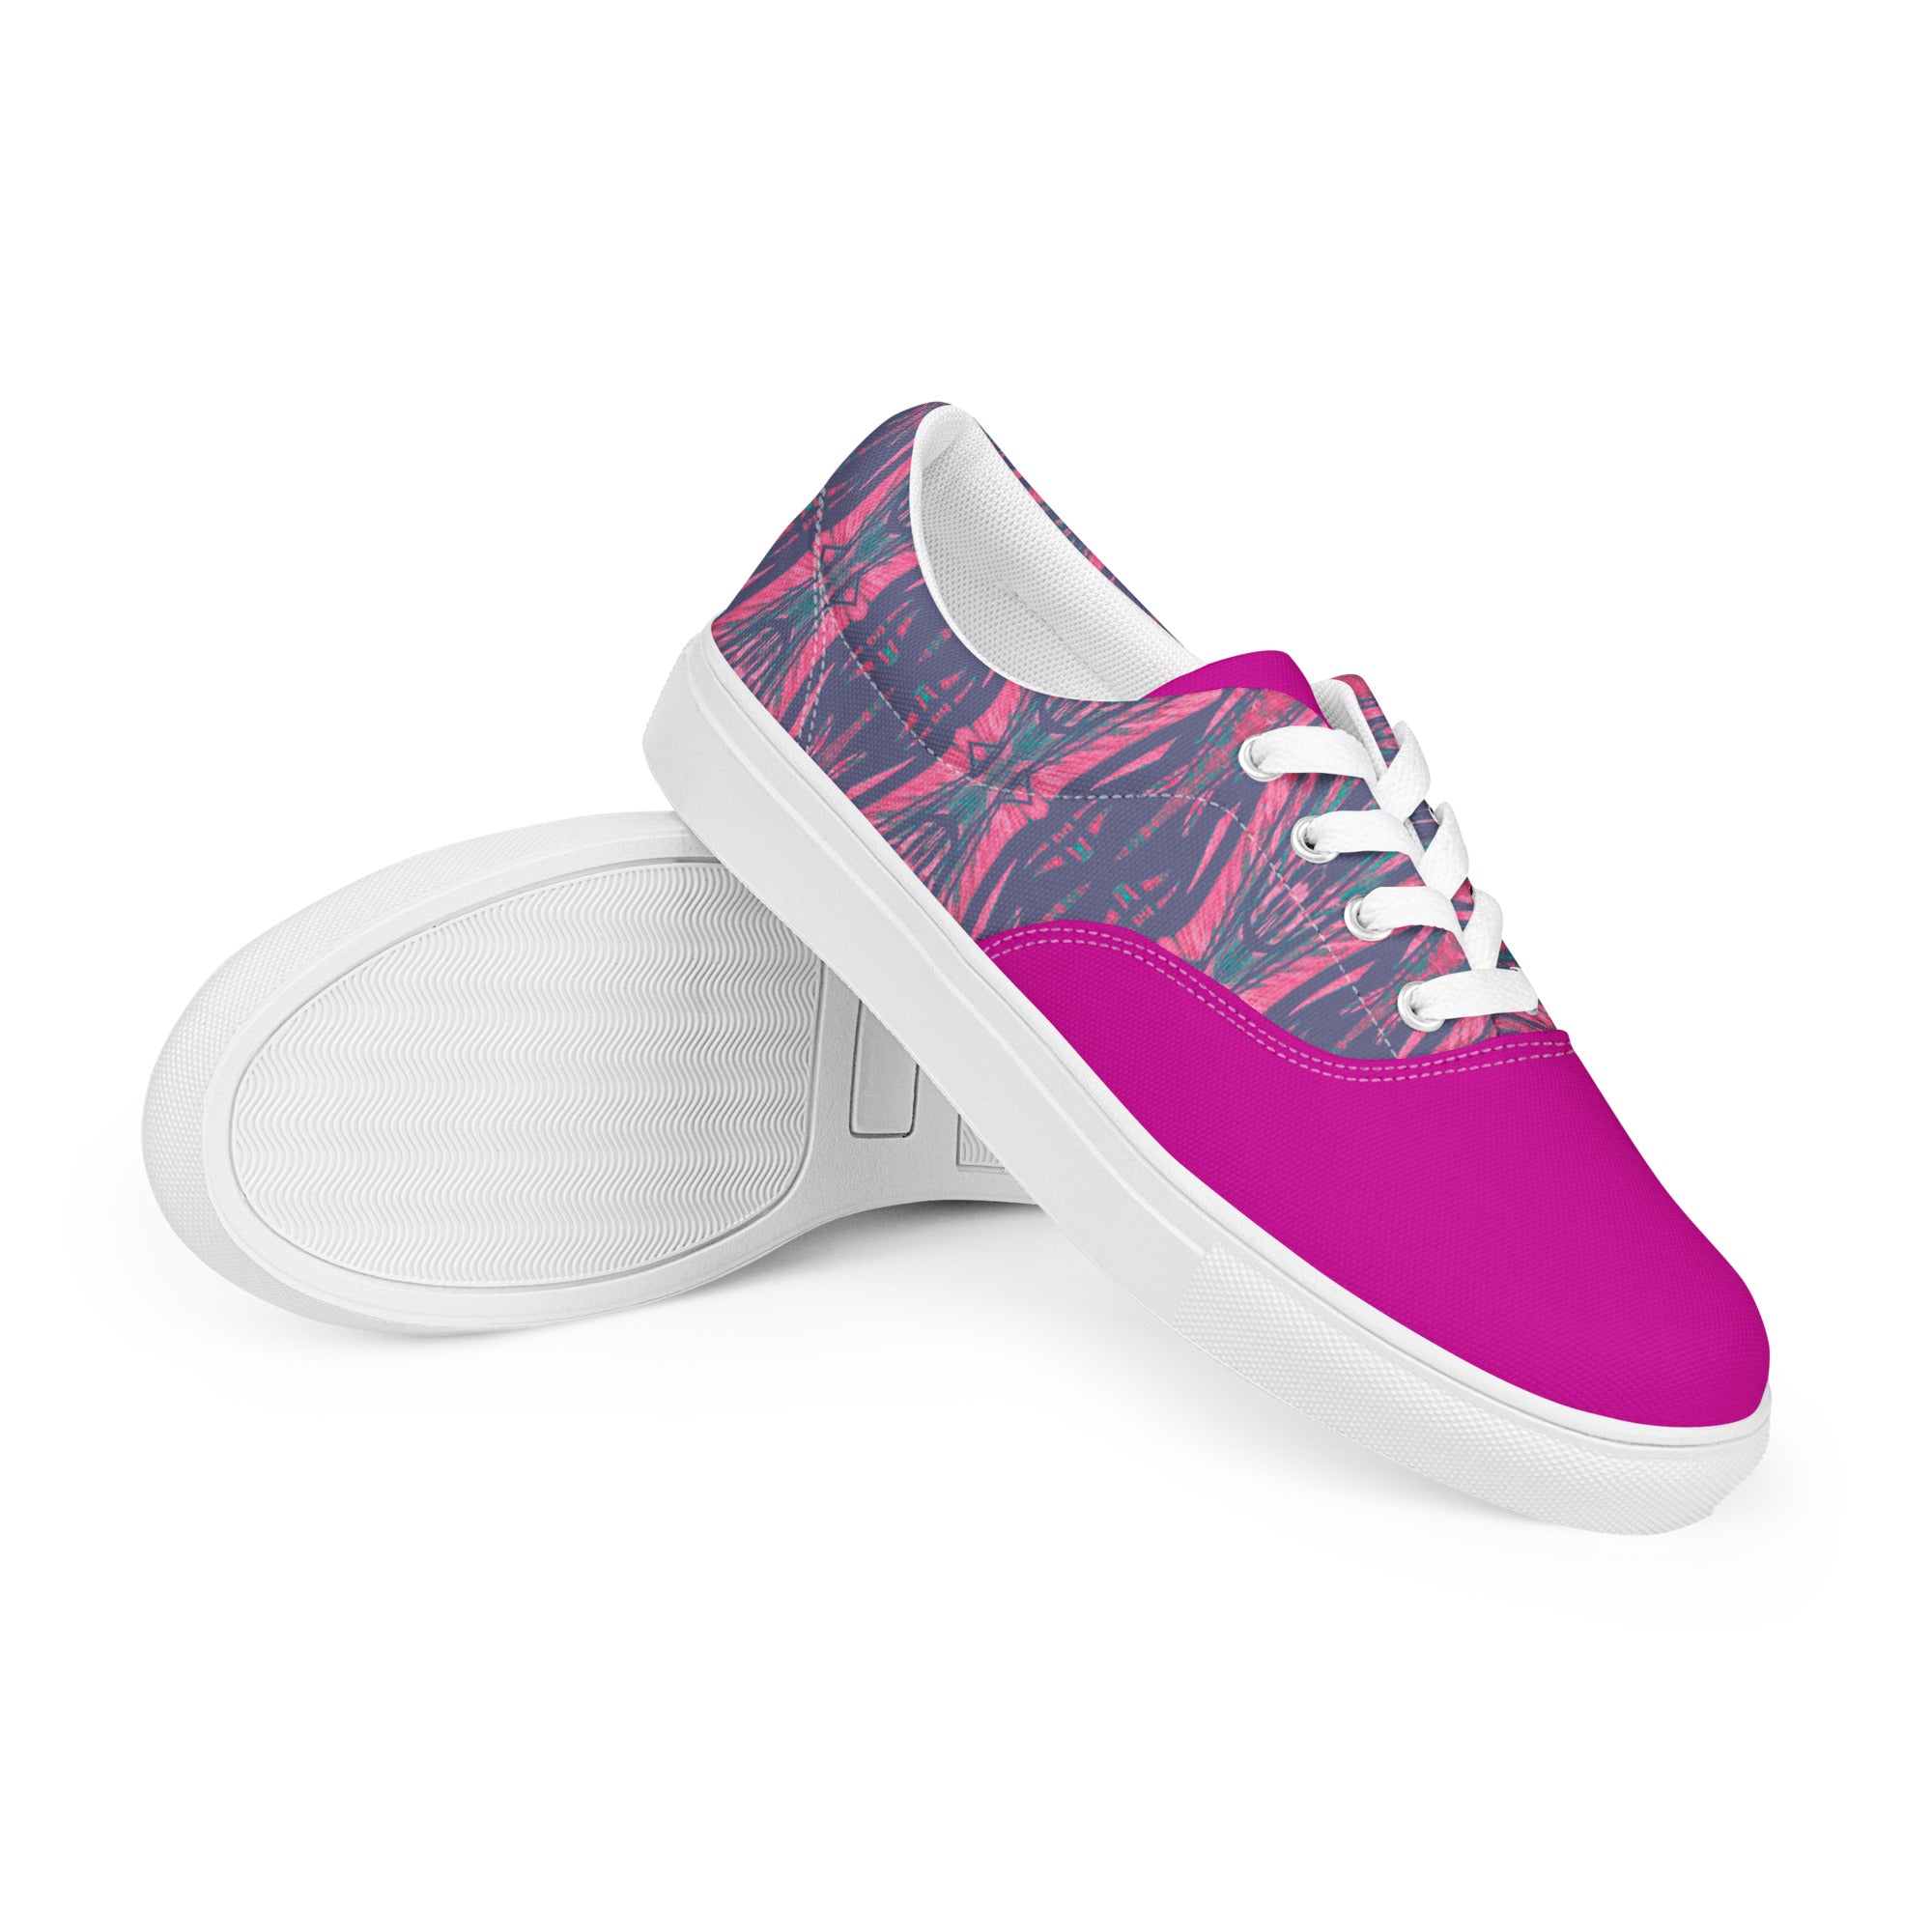 Shadows Gray On Pink Women’s Lace-Up Canvas Shoes Triboca Arts 5  